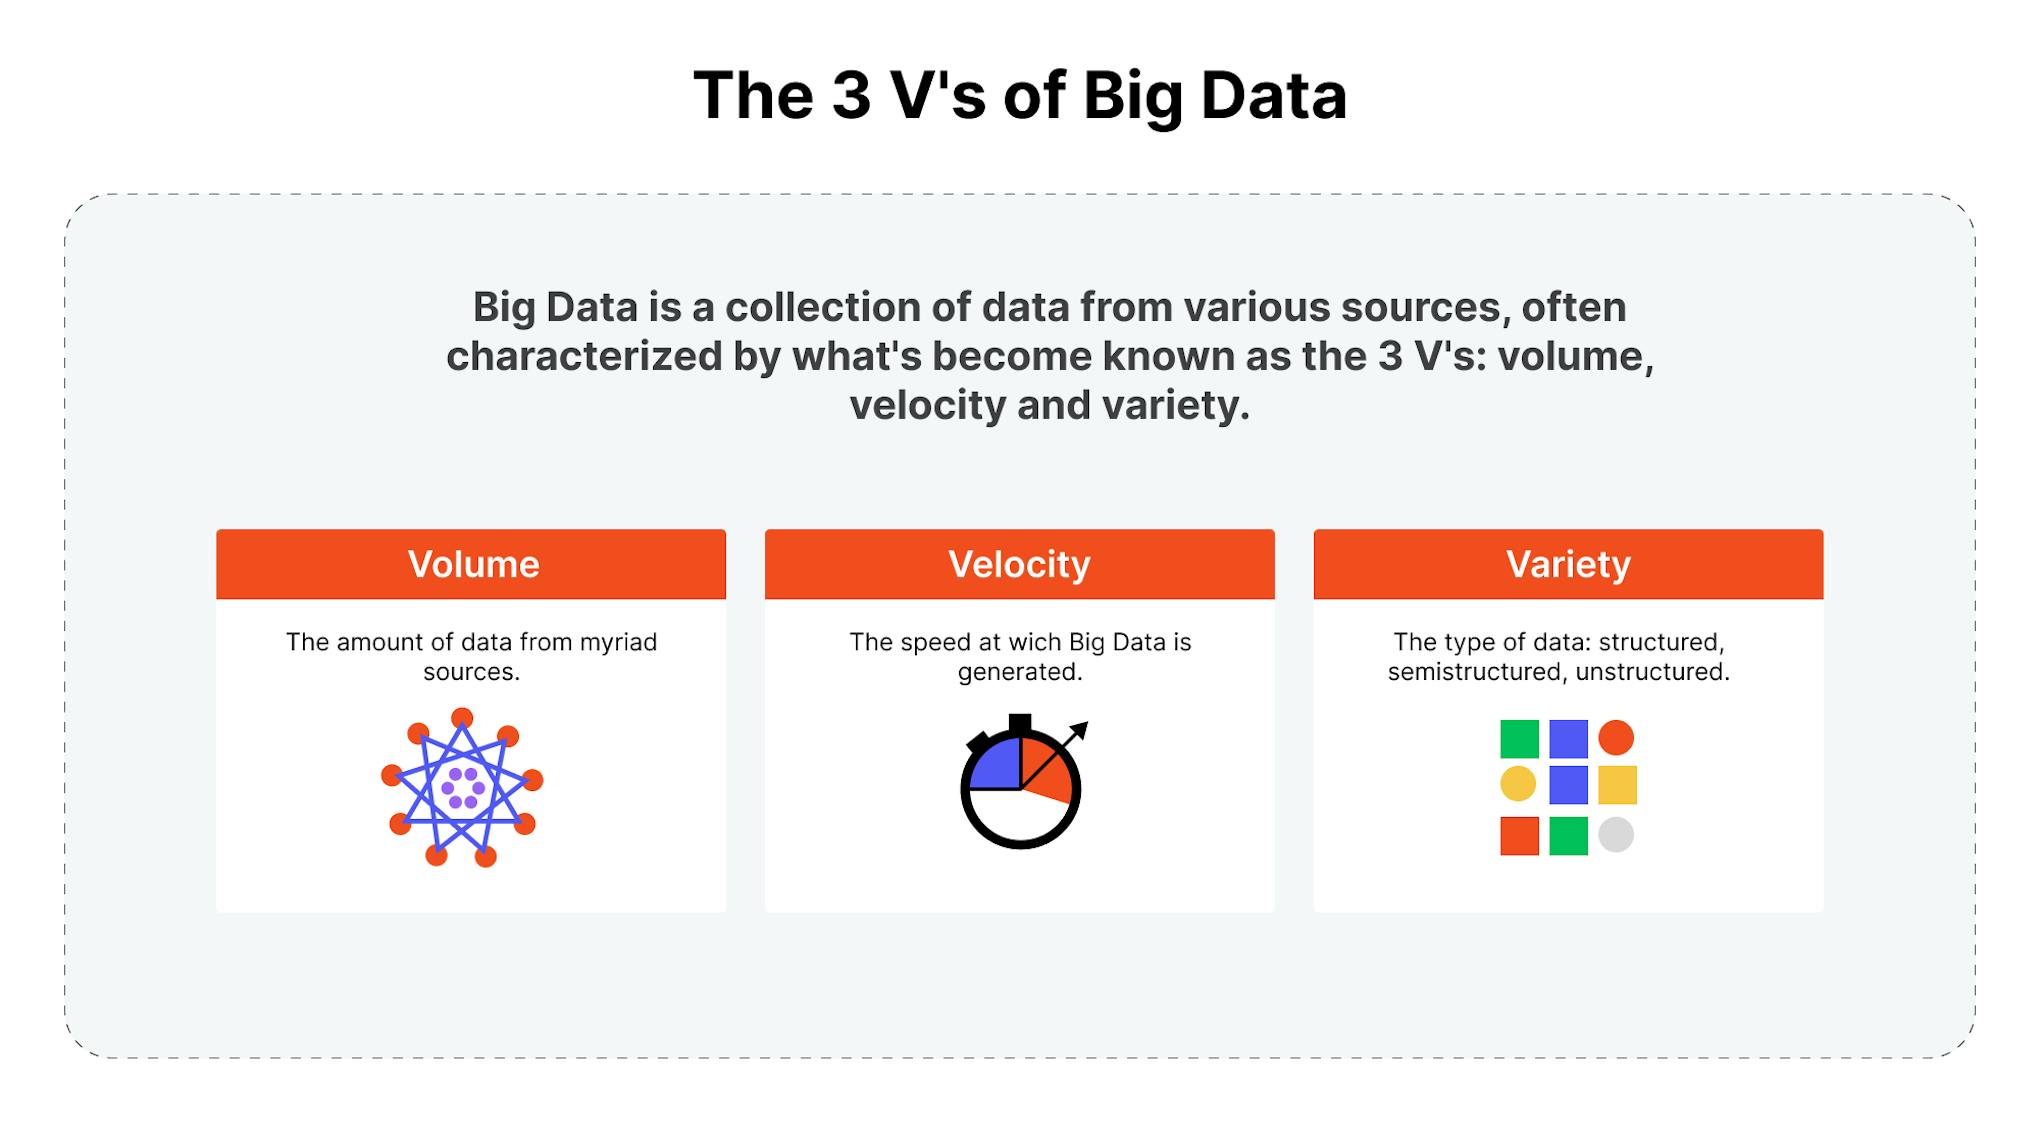 There are 3 Vs are often used to describe big data